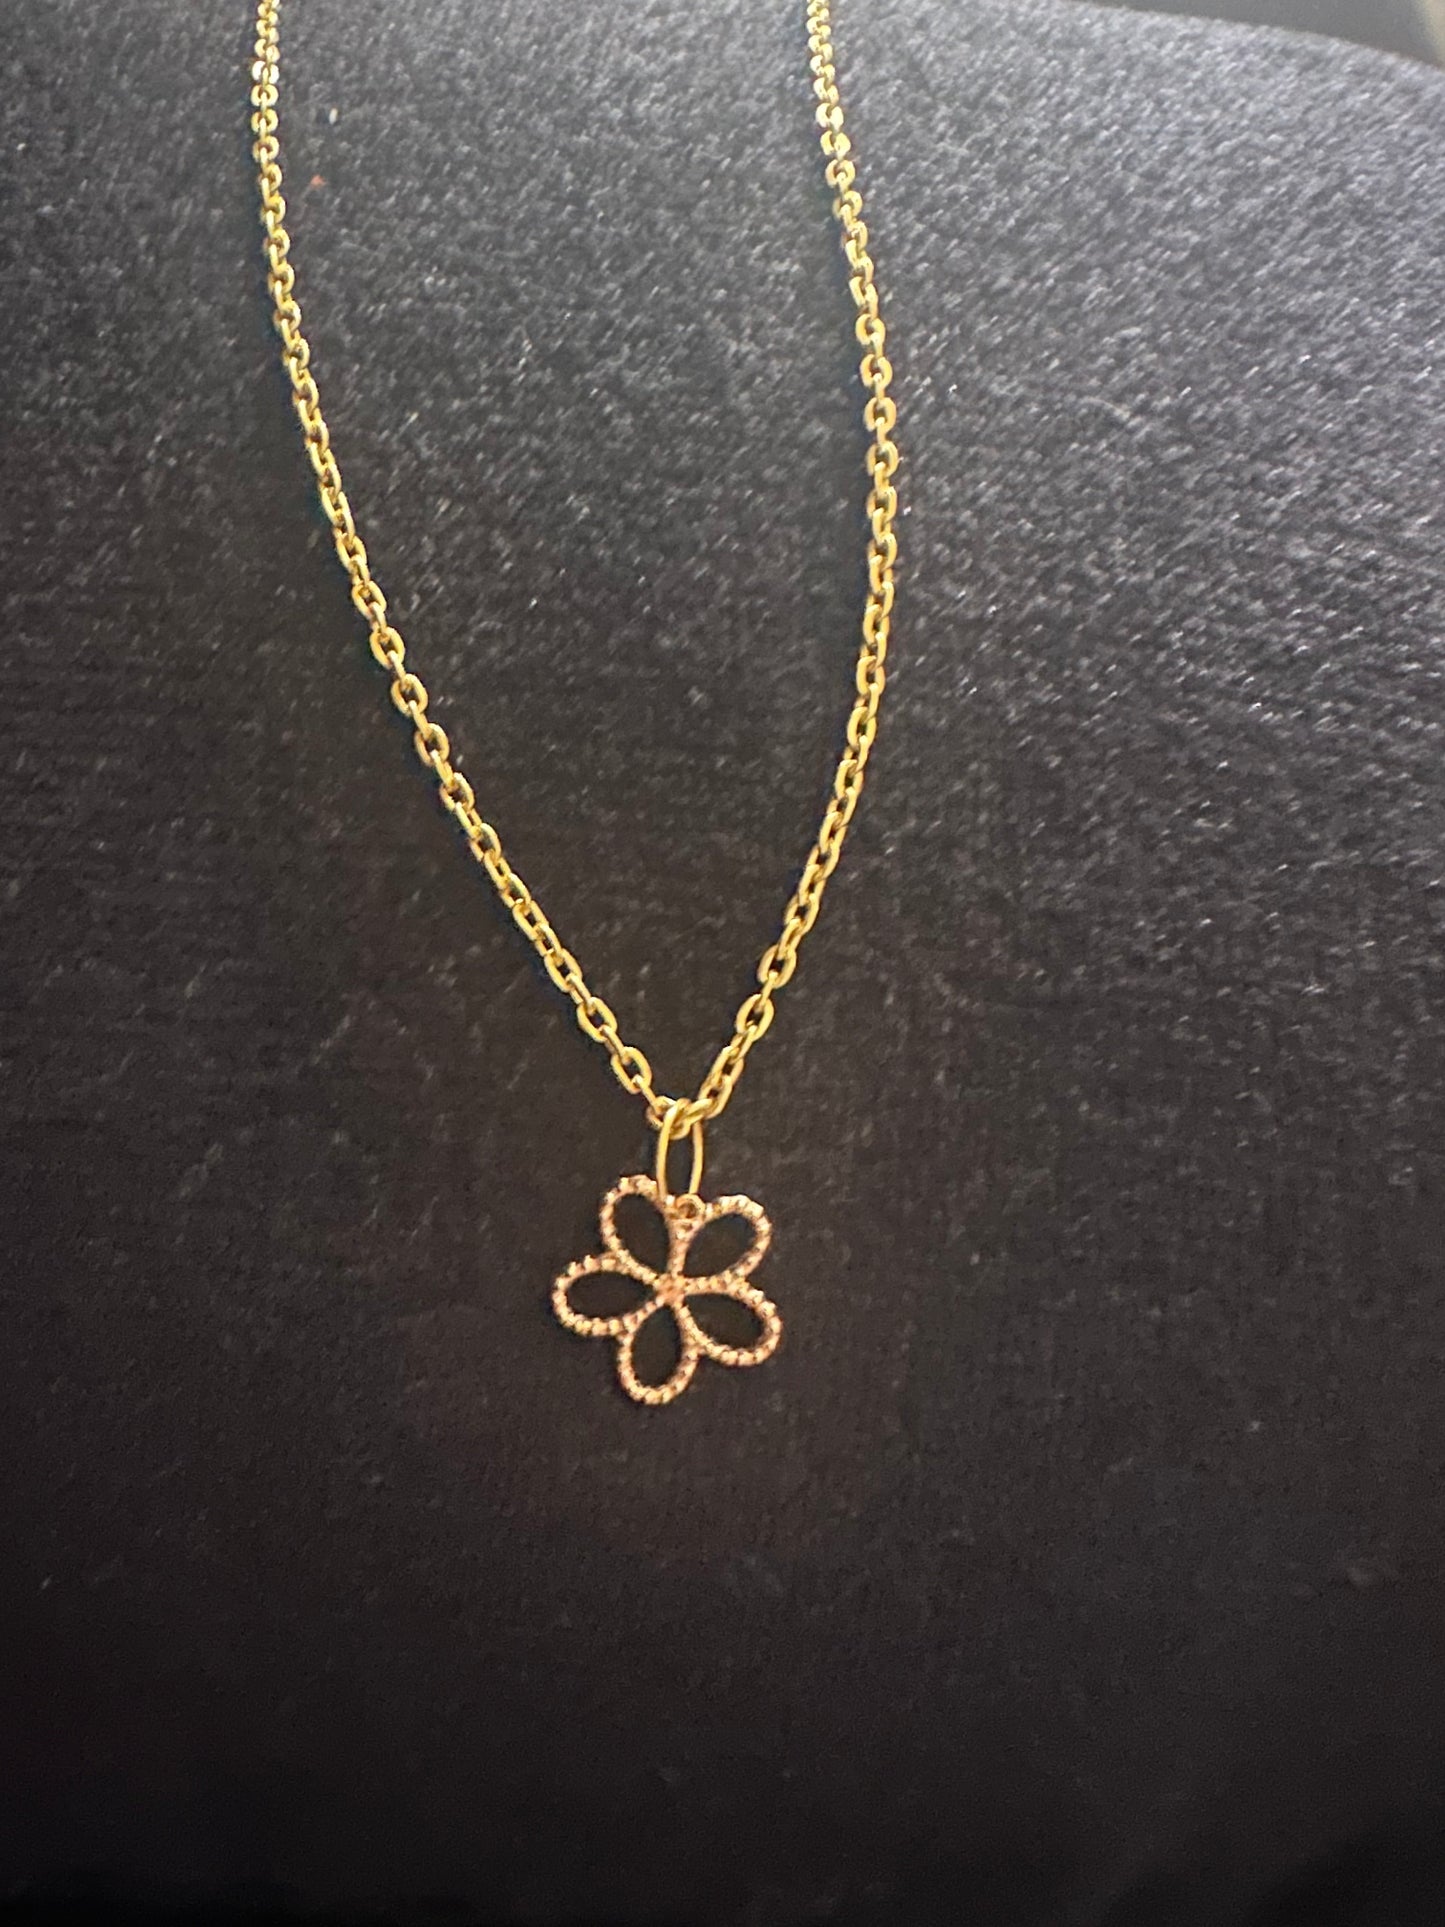 Women’s Flower Charm Pendant With Chain